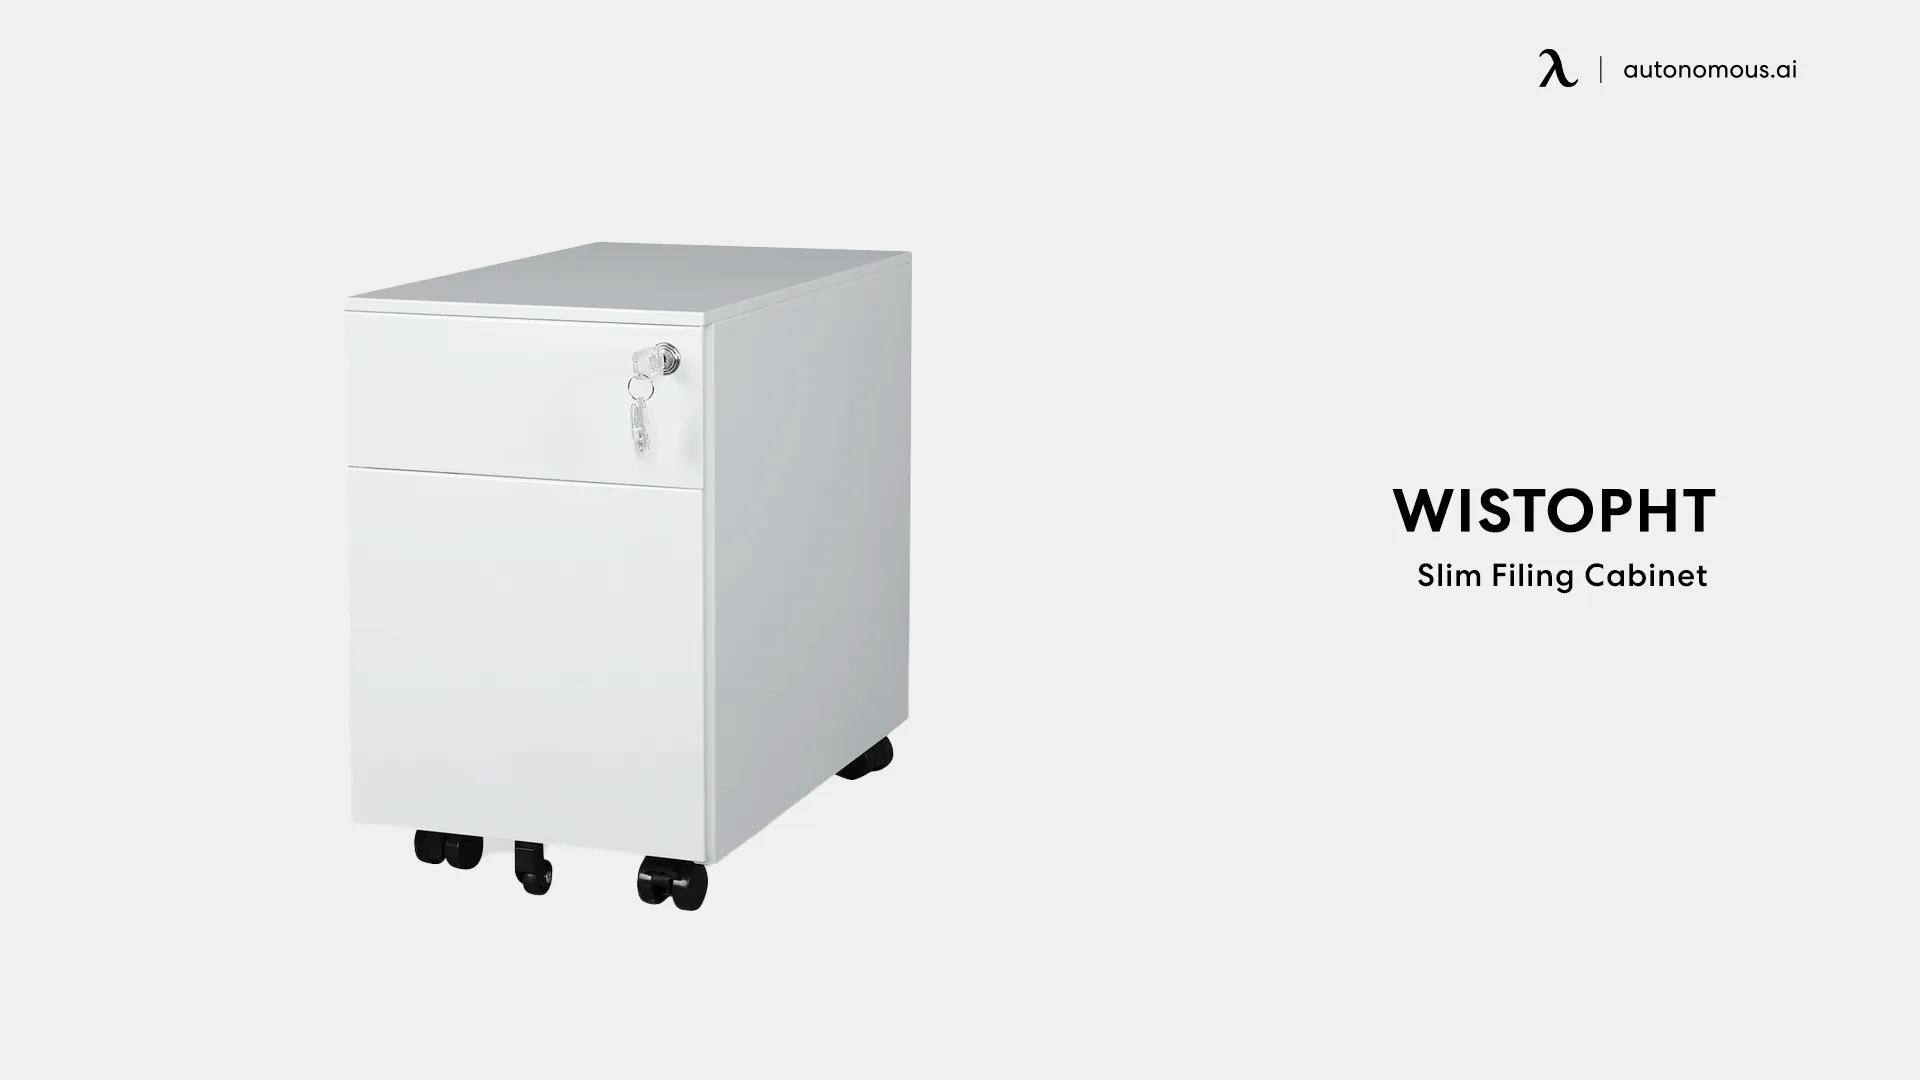 Slim Cabinet by Wistopht modern white file cabinet